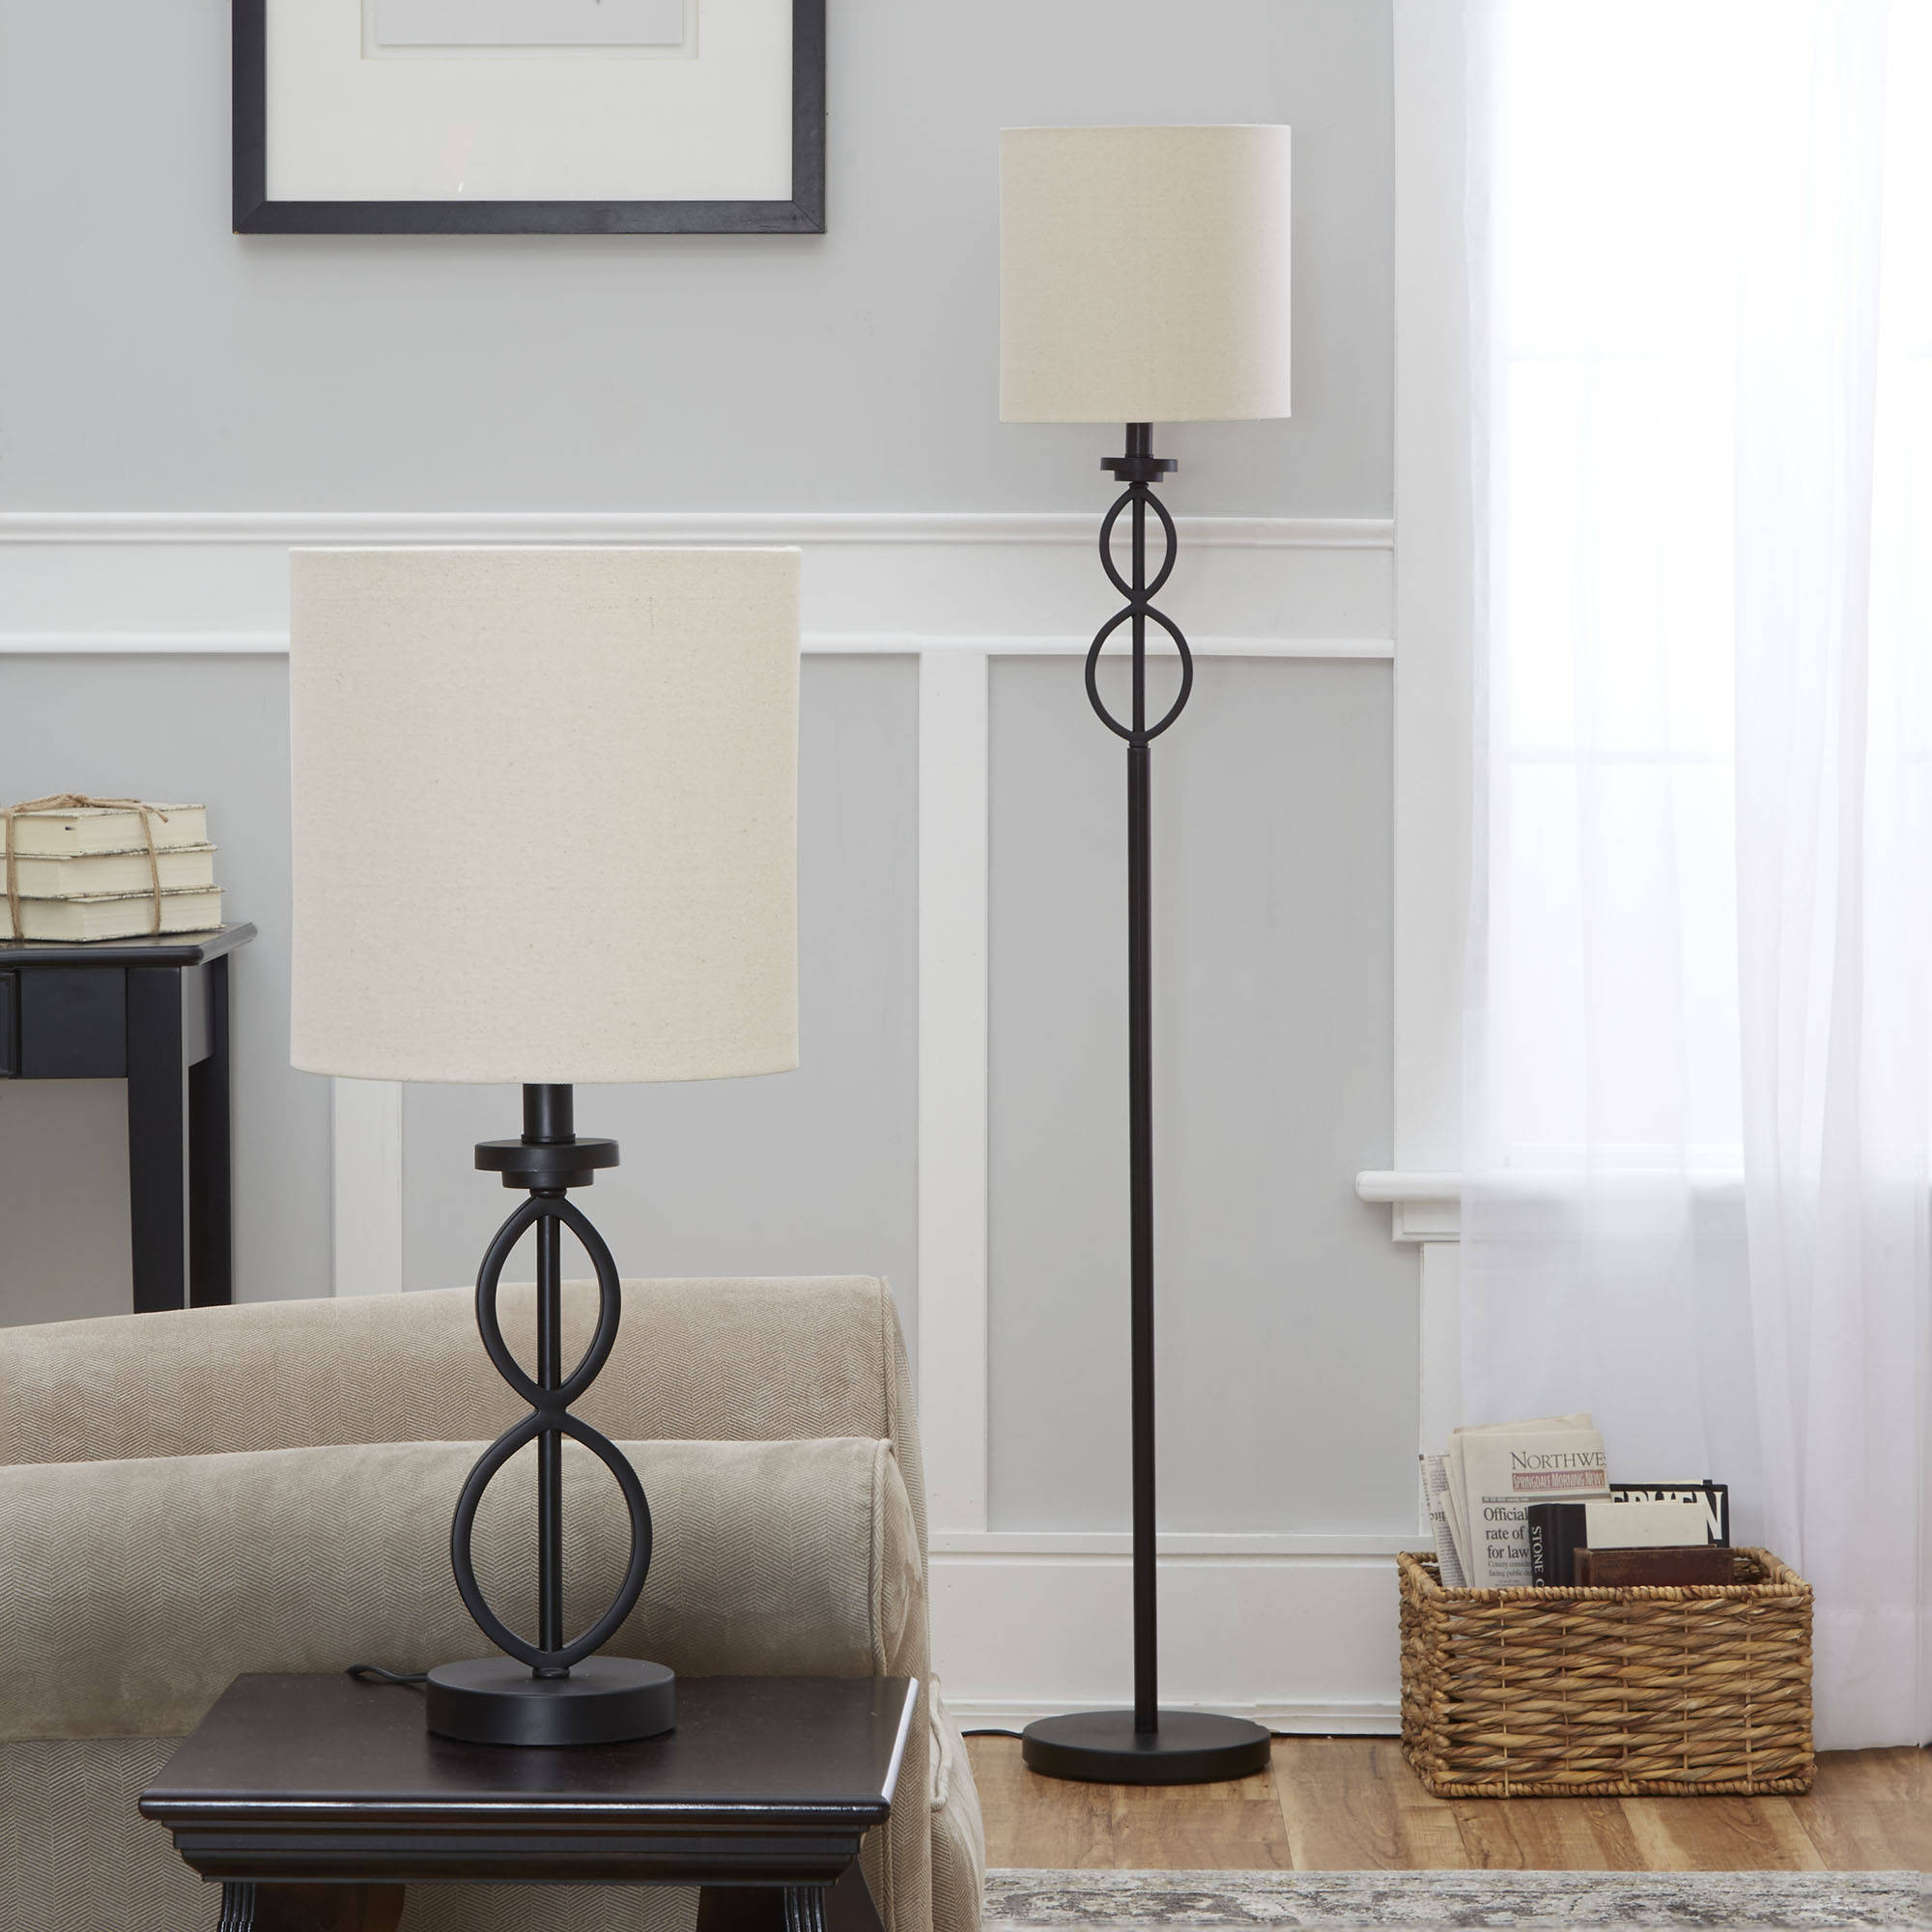 Mainstays Table And Floor Lamp Set Black Matte Finish inside sizing 2000 X 2000